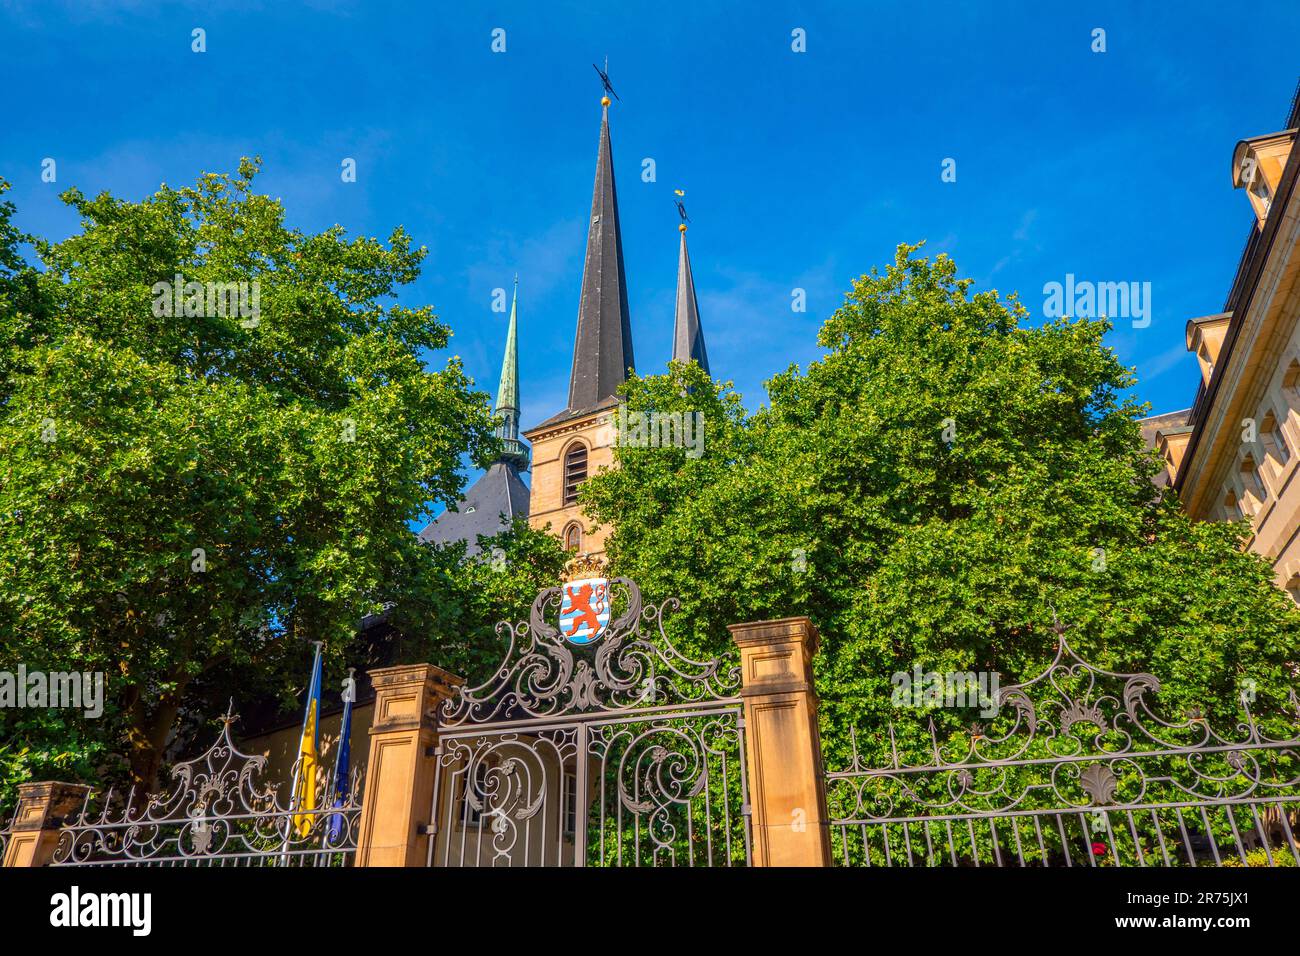 Cathédrale notre Dame, Luxembourg, Benelux, pays du Benelux, Luxembourg Banque D'Images